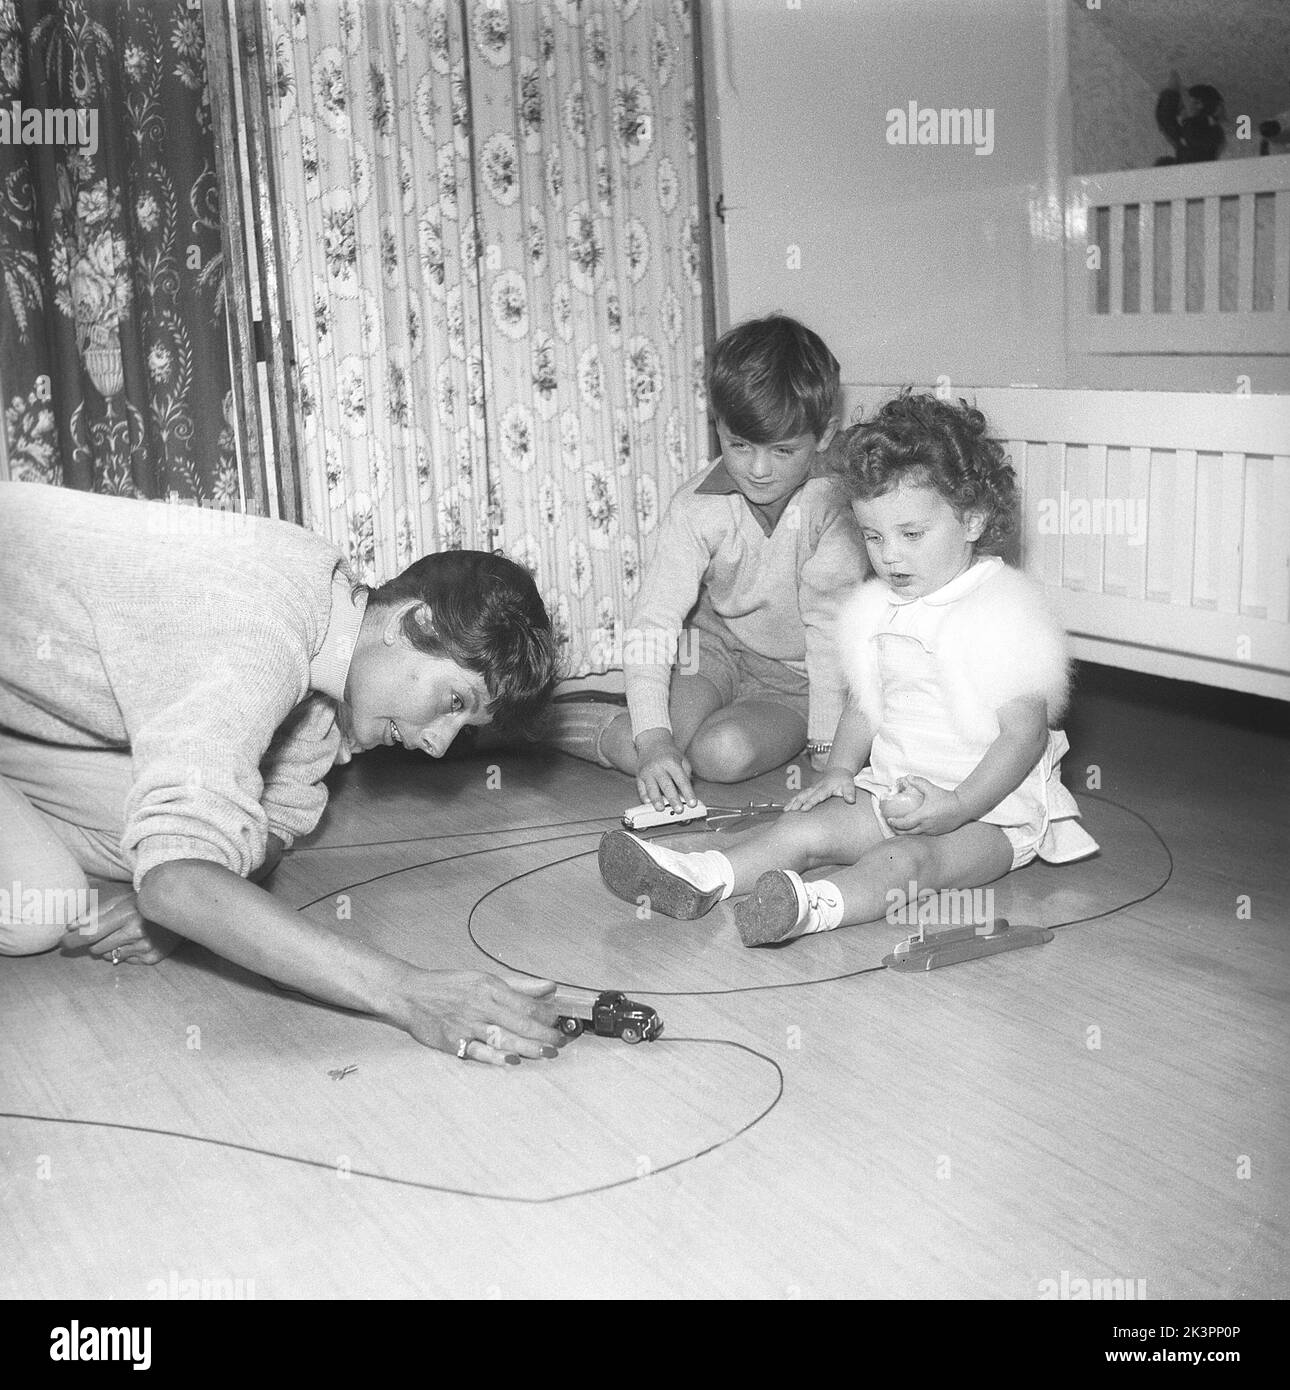 Mother in the 1950s. Mrs Erica Sundt with her two children playing with toys on the floor. A typical simple toy of the 1950s where the winded up cars ran along a track, in this case a flexible metal track. The key that was used to wind the toys up is visible on the floor beside her hand.   Sweden 1954 Kristoffersson ref BX24-4 Stock Photo